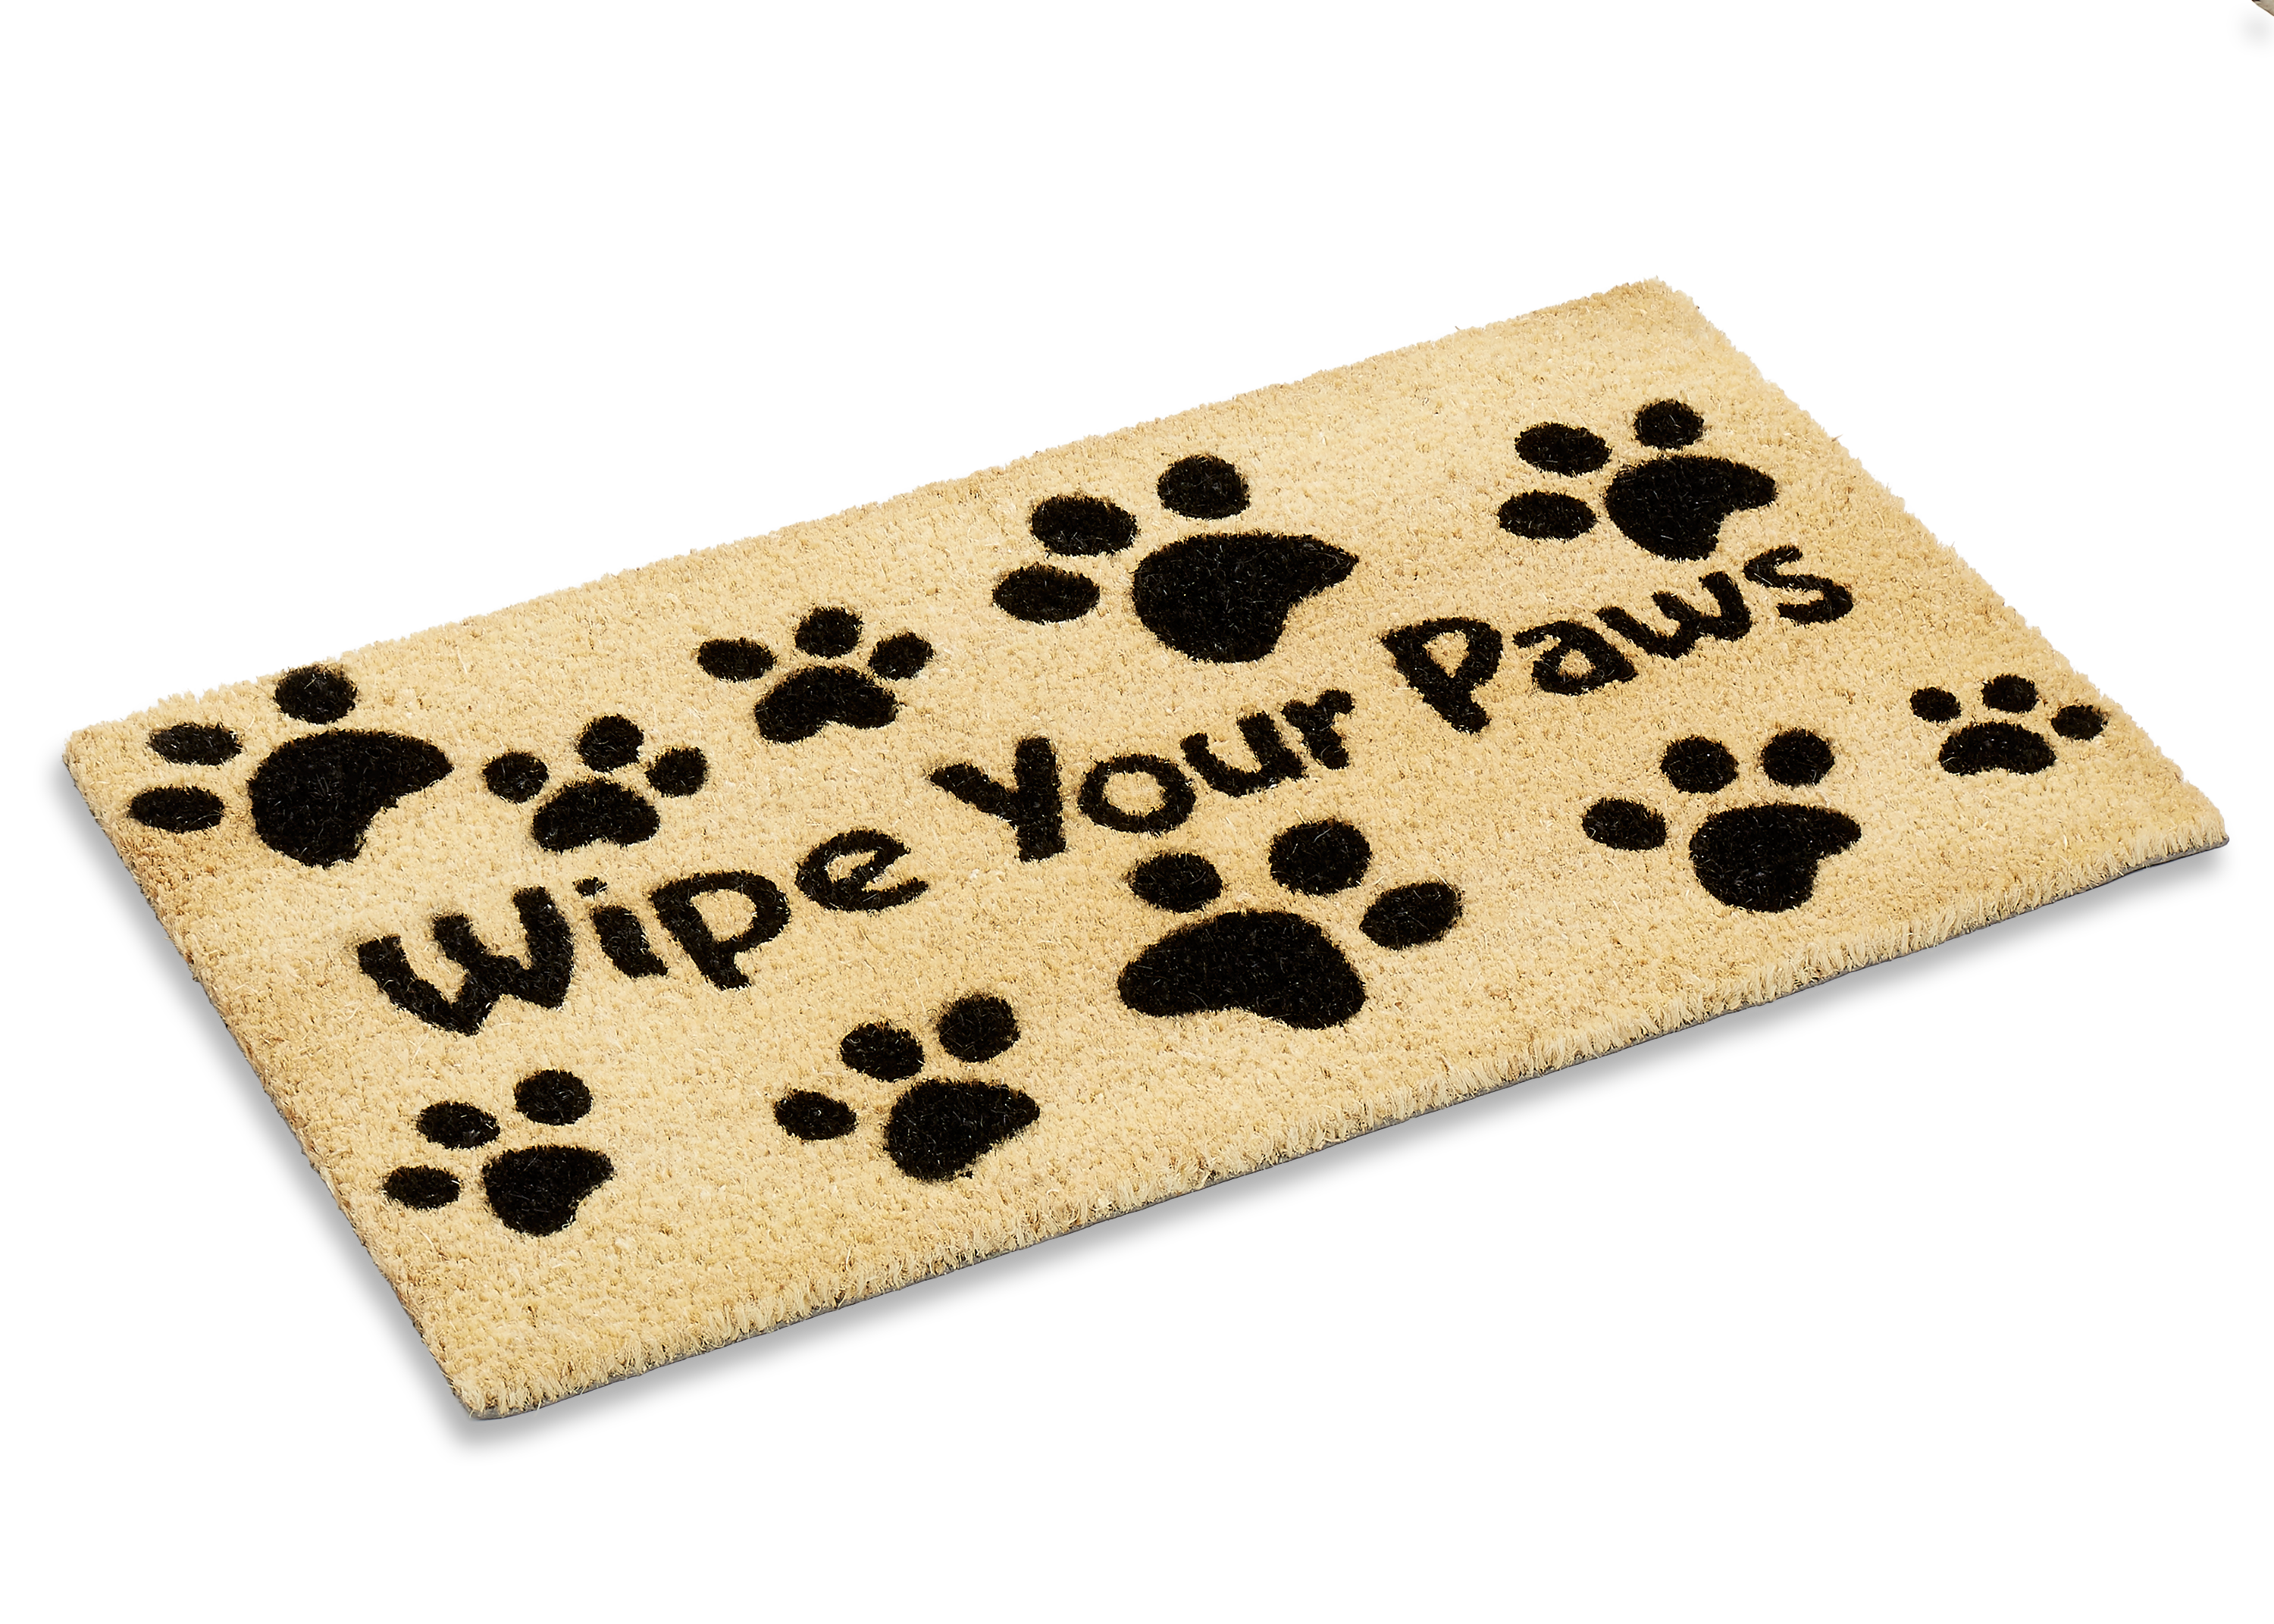 WIPE YOUR PAWS